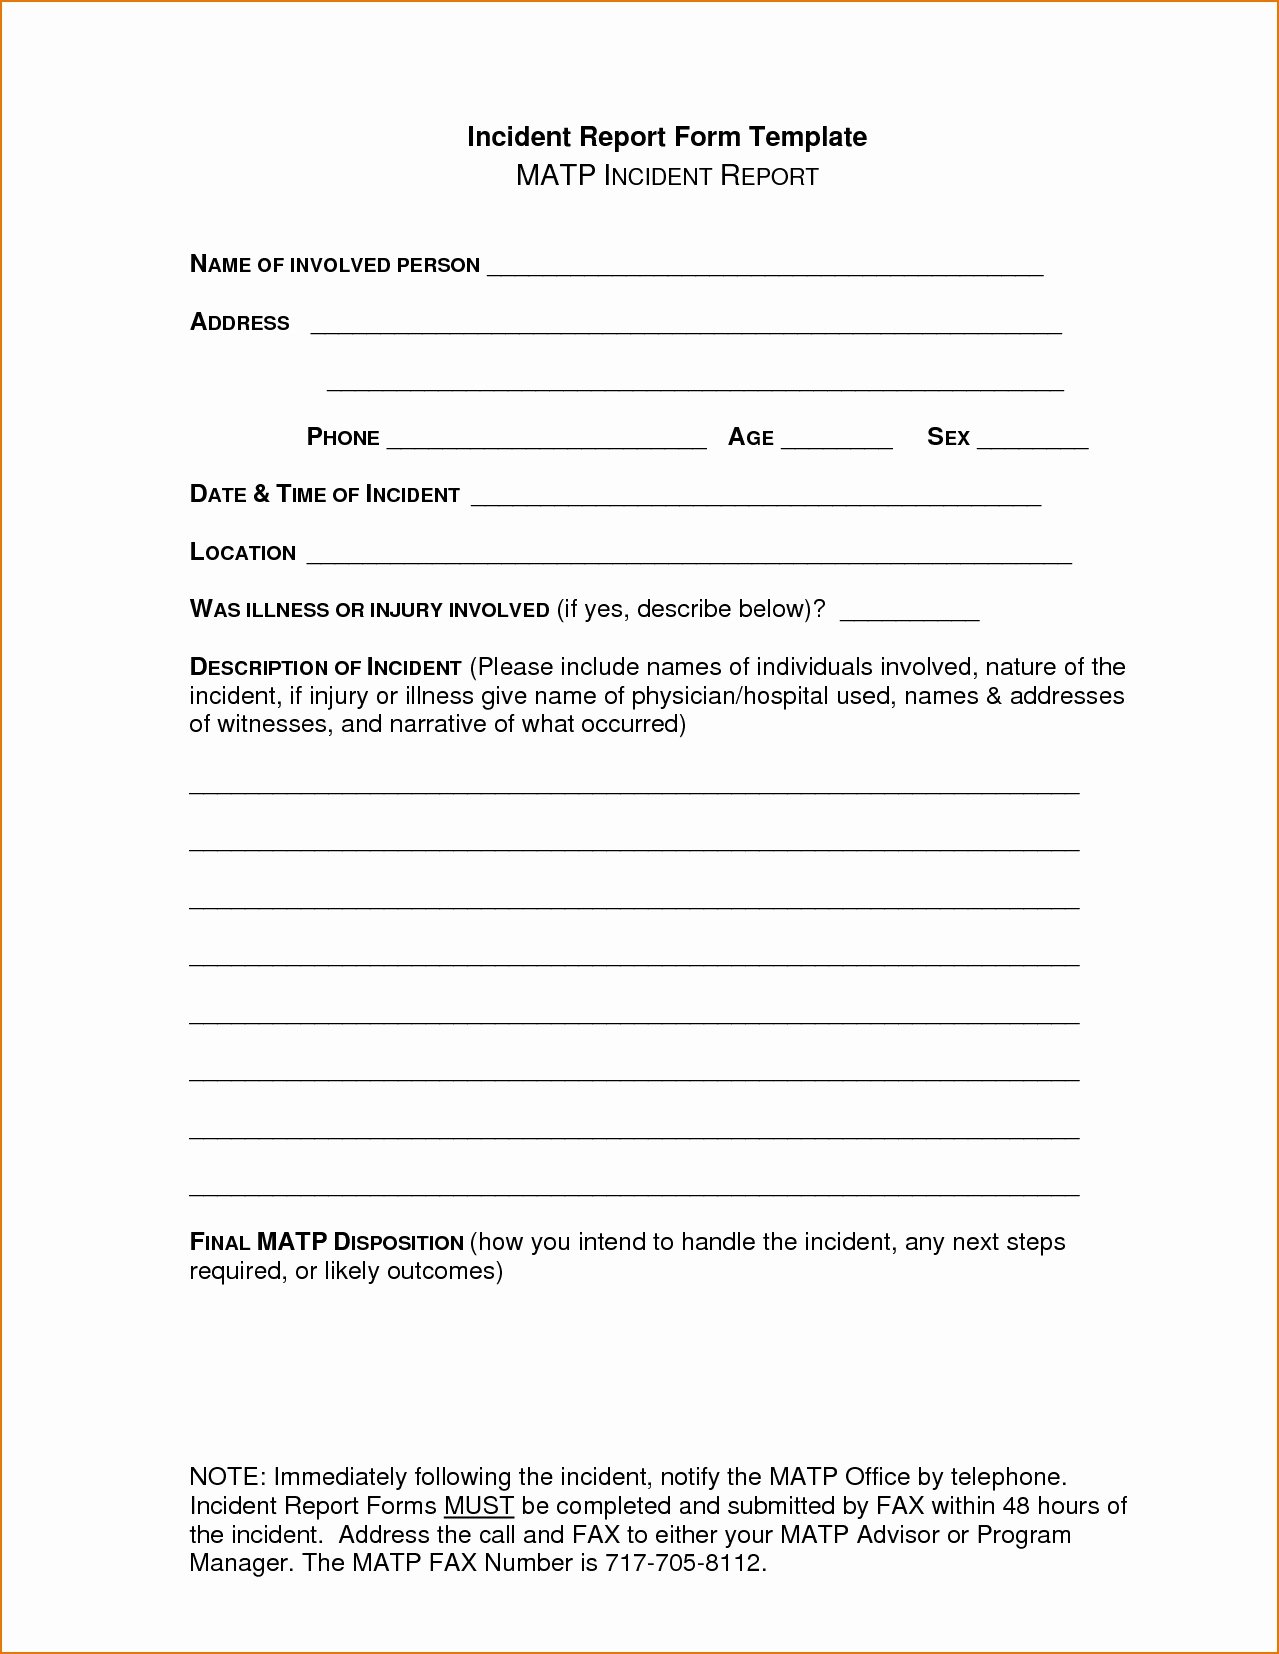 Incident Report Template Microsoft Awesome Incident Report Template Microsoft Word